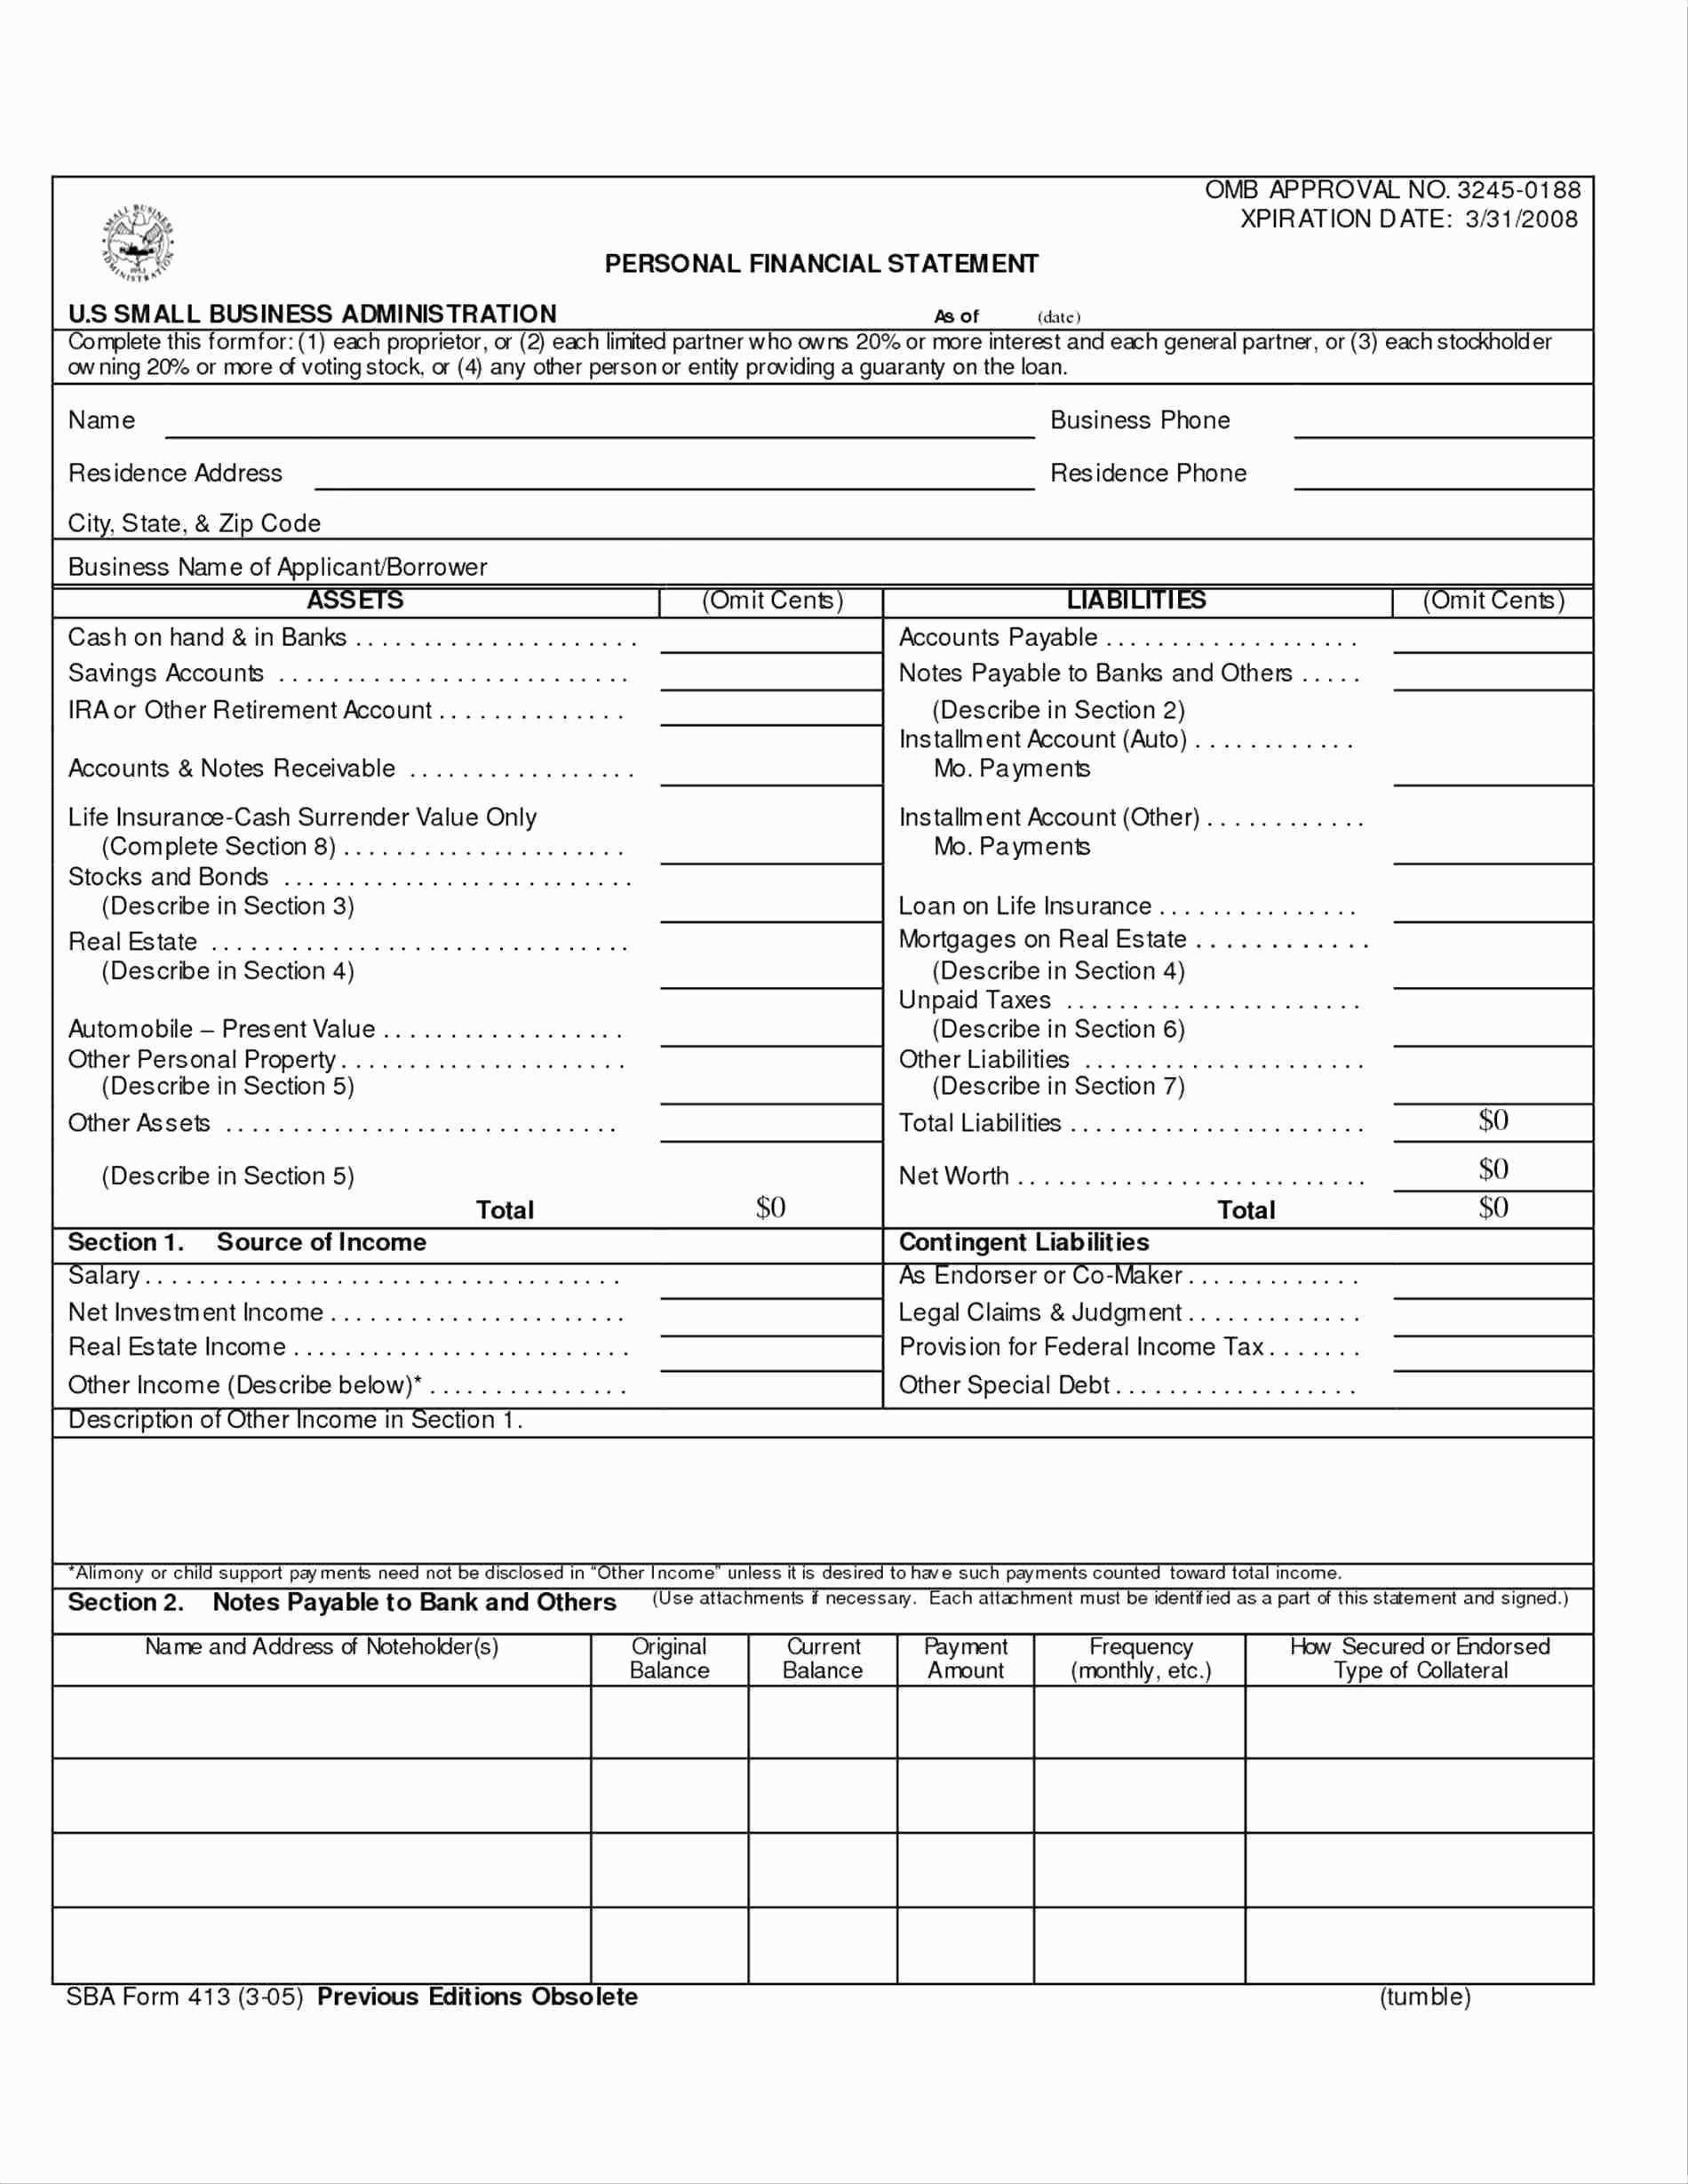 Sba Personal Ncial Statement Template Excel Spreadsheet Free Pertaining To Excel Financial Report Templates